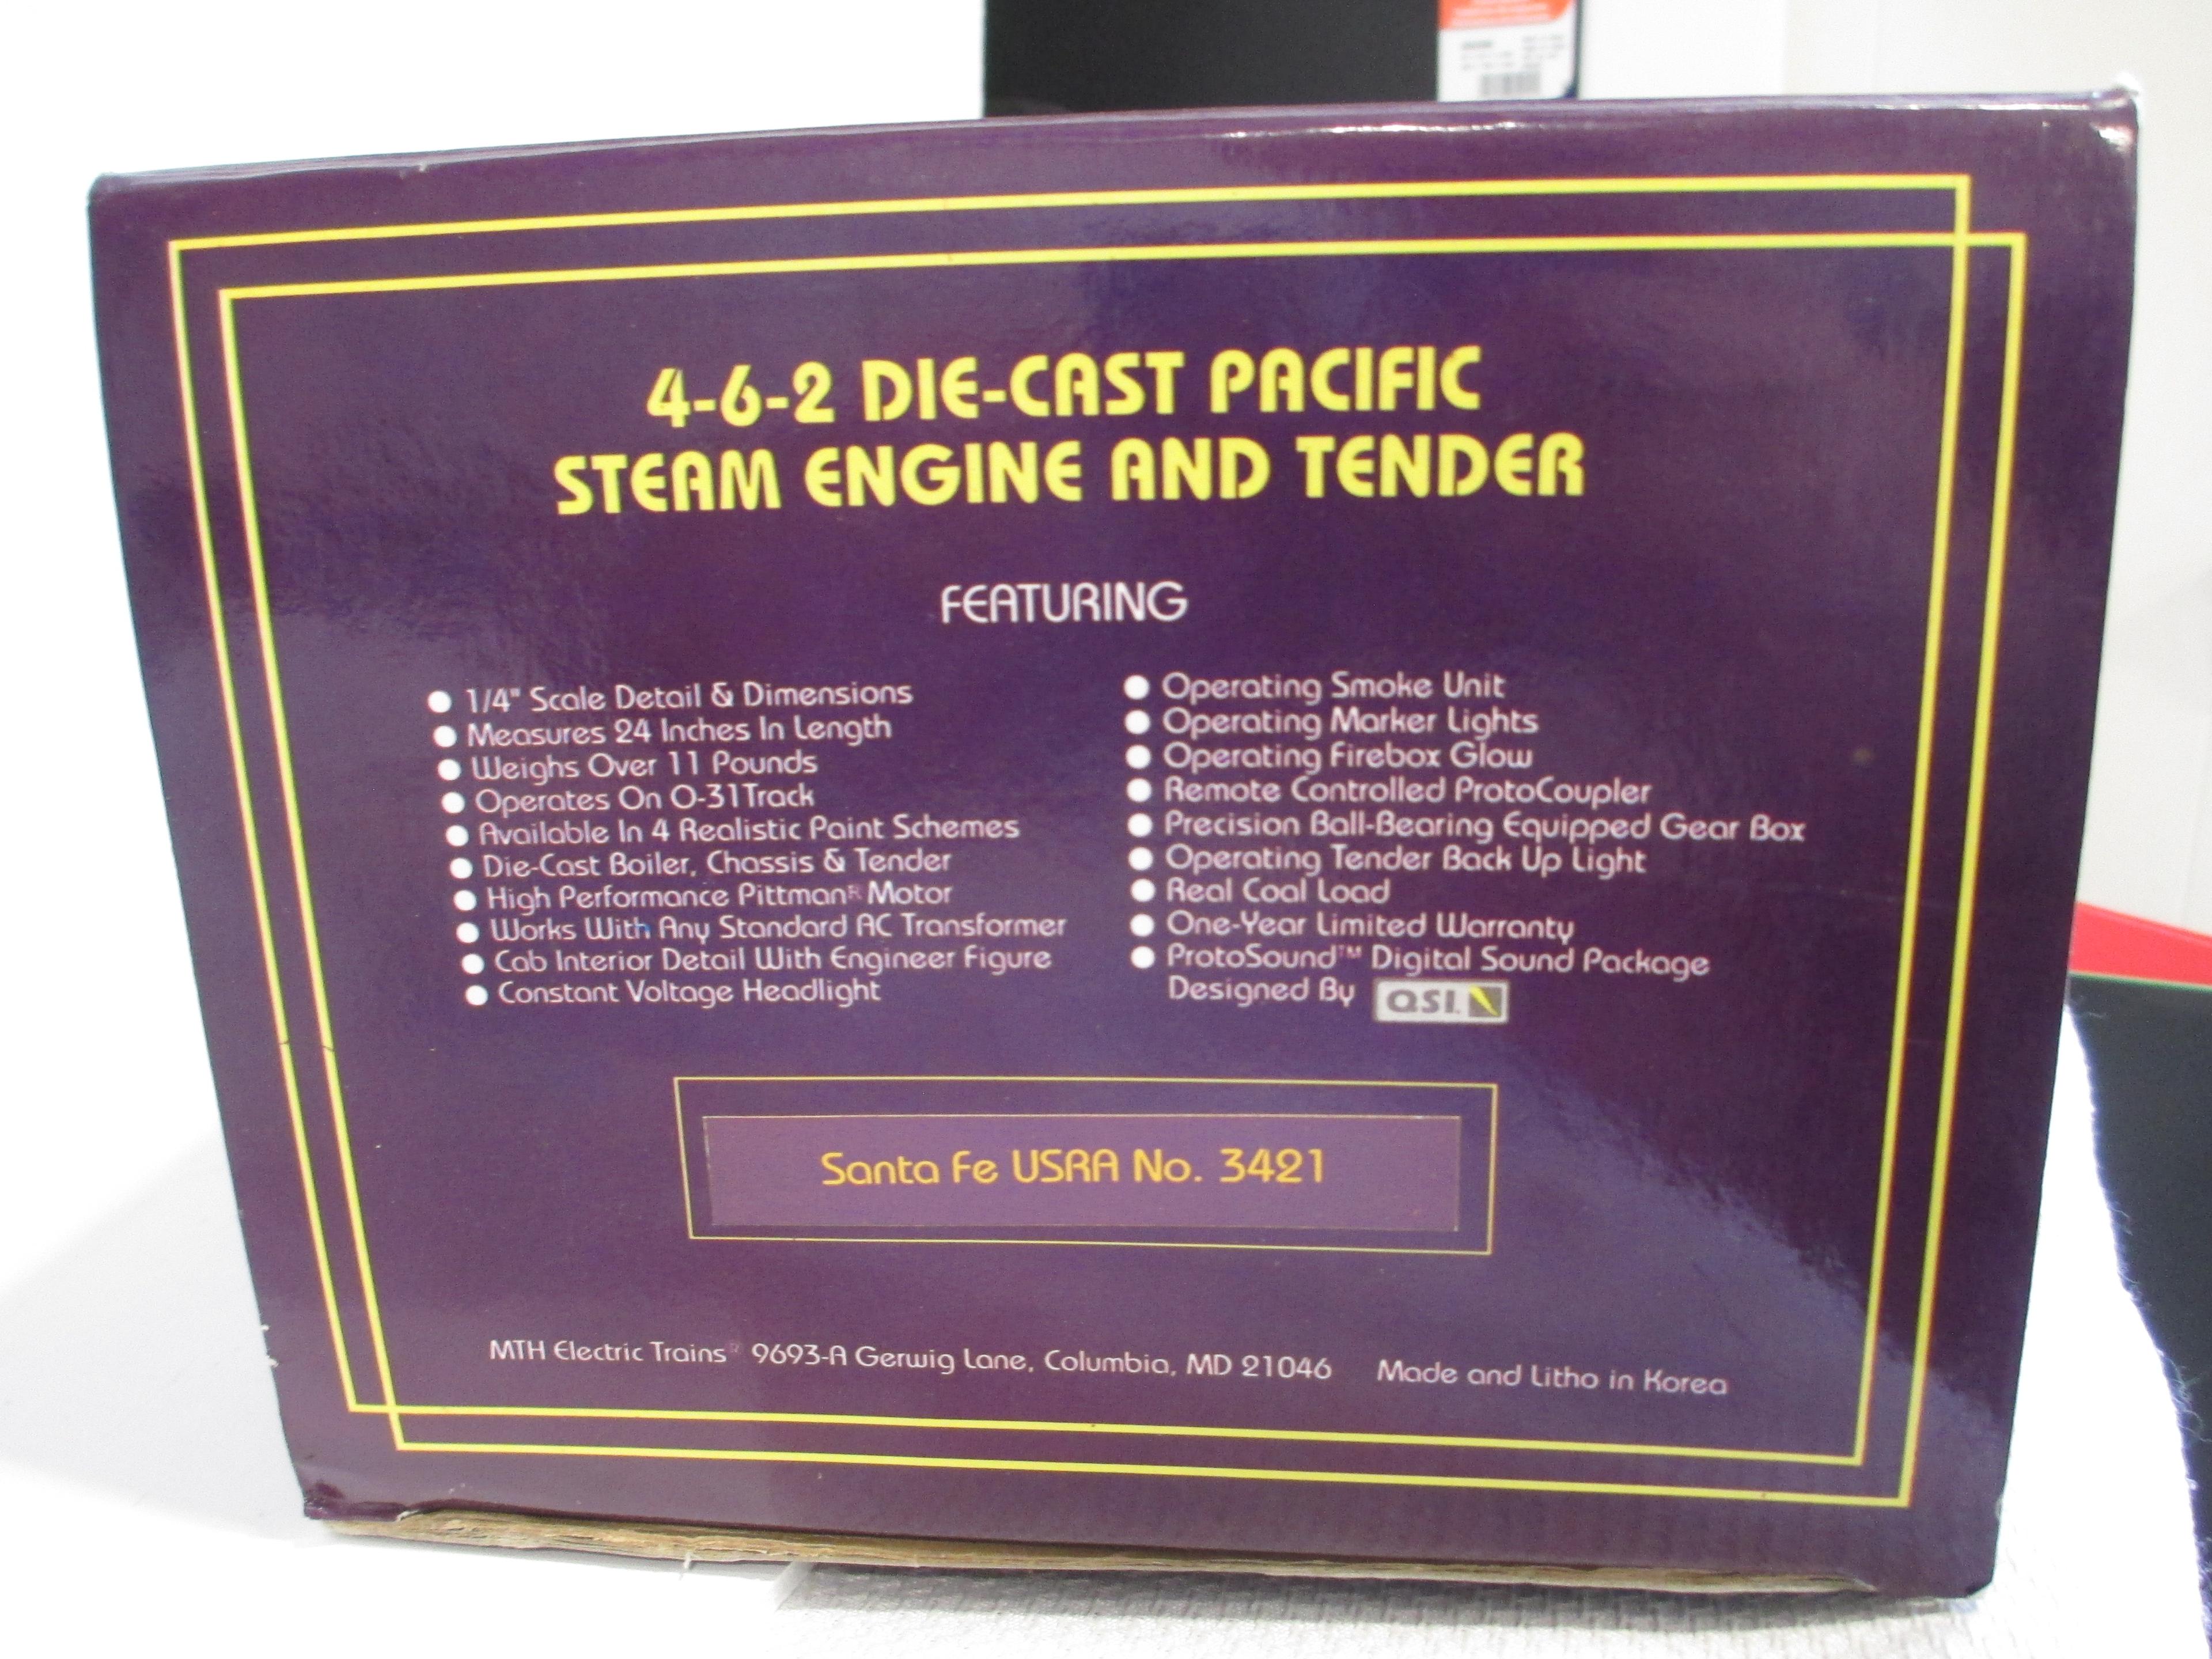 M.T.H. Electric Trains 4-6-2 Die-Cast Pacific Steam Engine And Tender